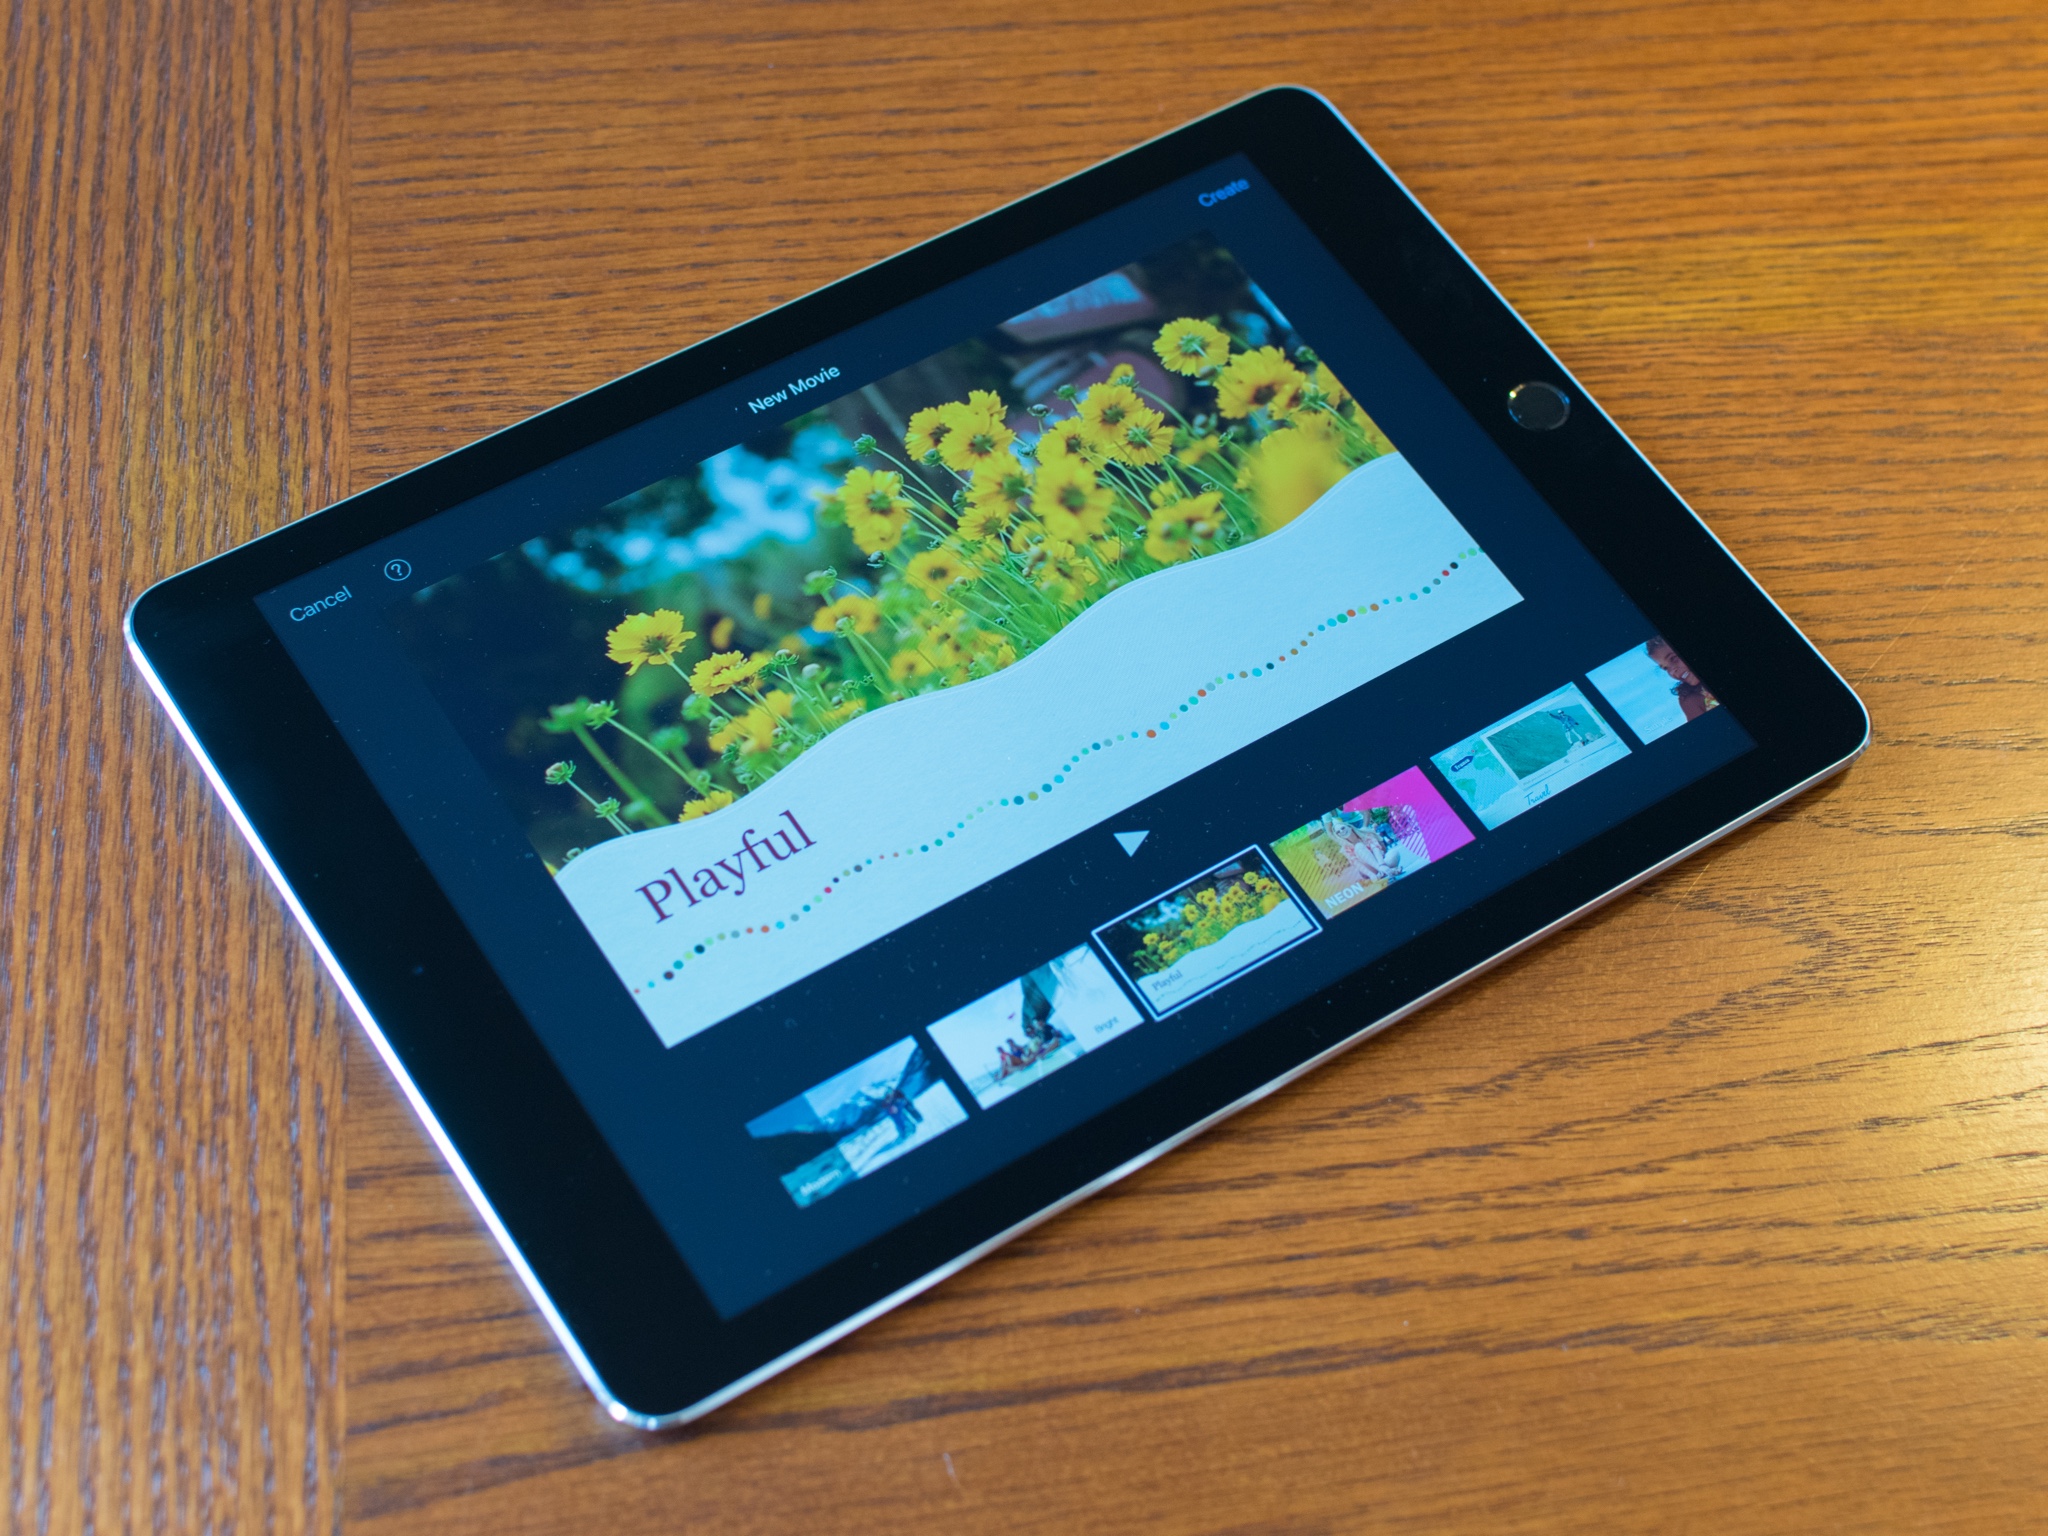 iMovie can now edit 4K videos on the iPad Air 2